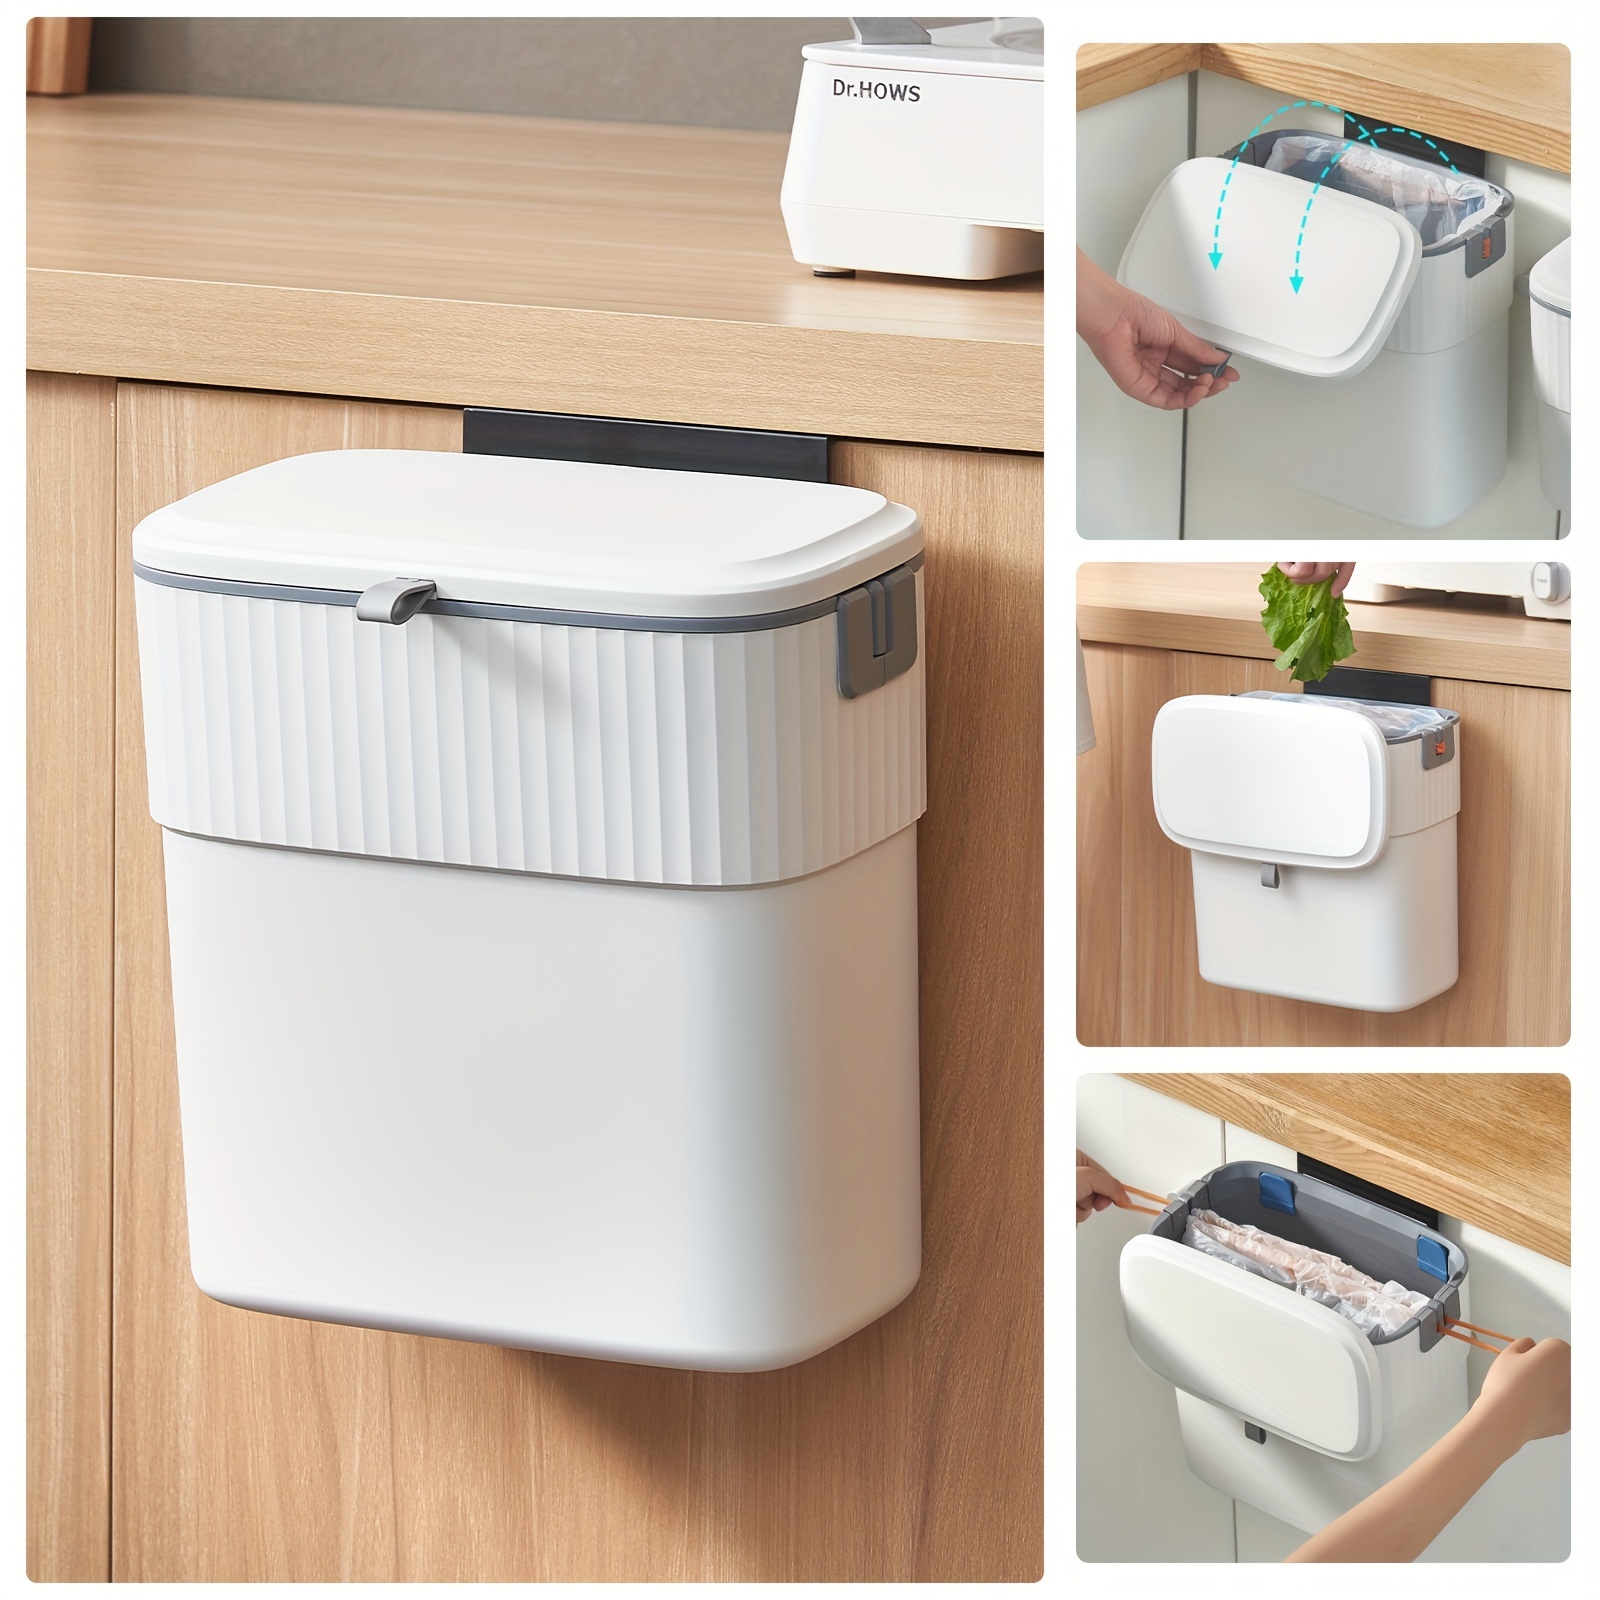 

Elpheco Hanging Trash Can With Lid Kitchen Compost Bin For Under Sink, Plastic Wall-mounted Garbage Can, Small Kitchen Trash Bin, Small Trash Can With Lid For Cupboard Countertop